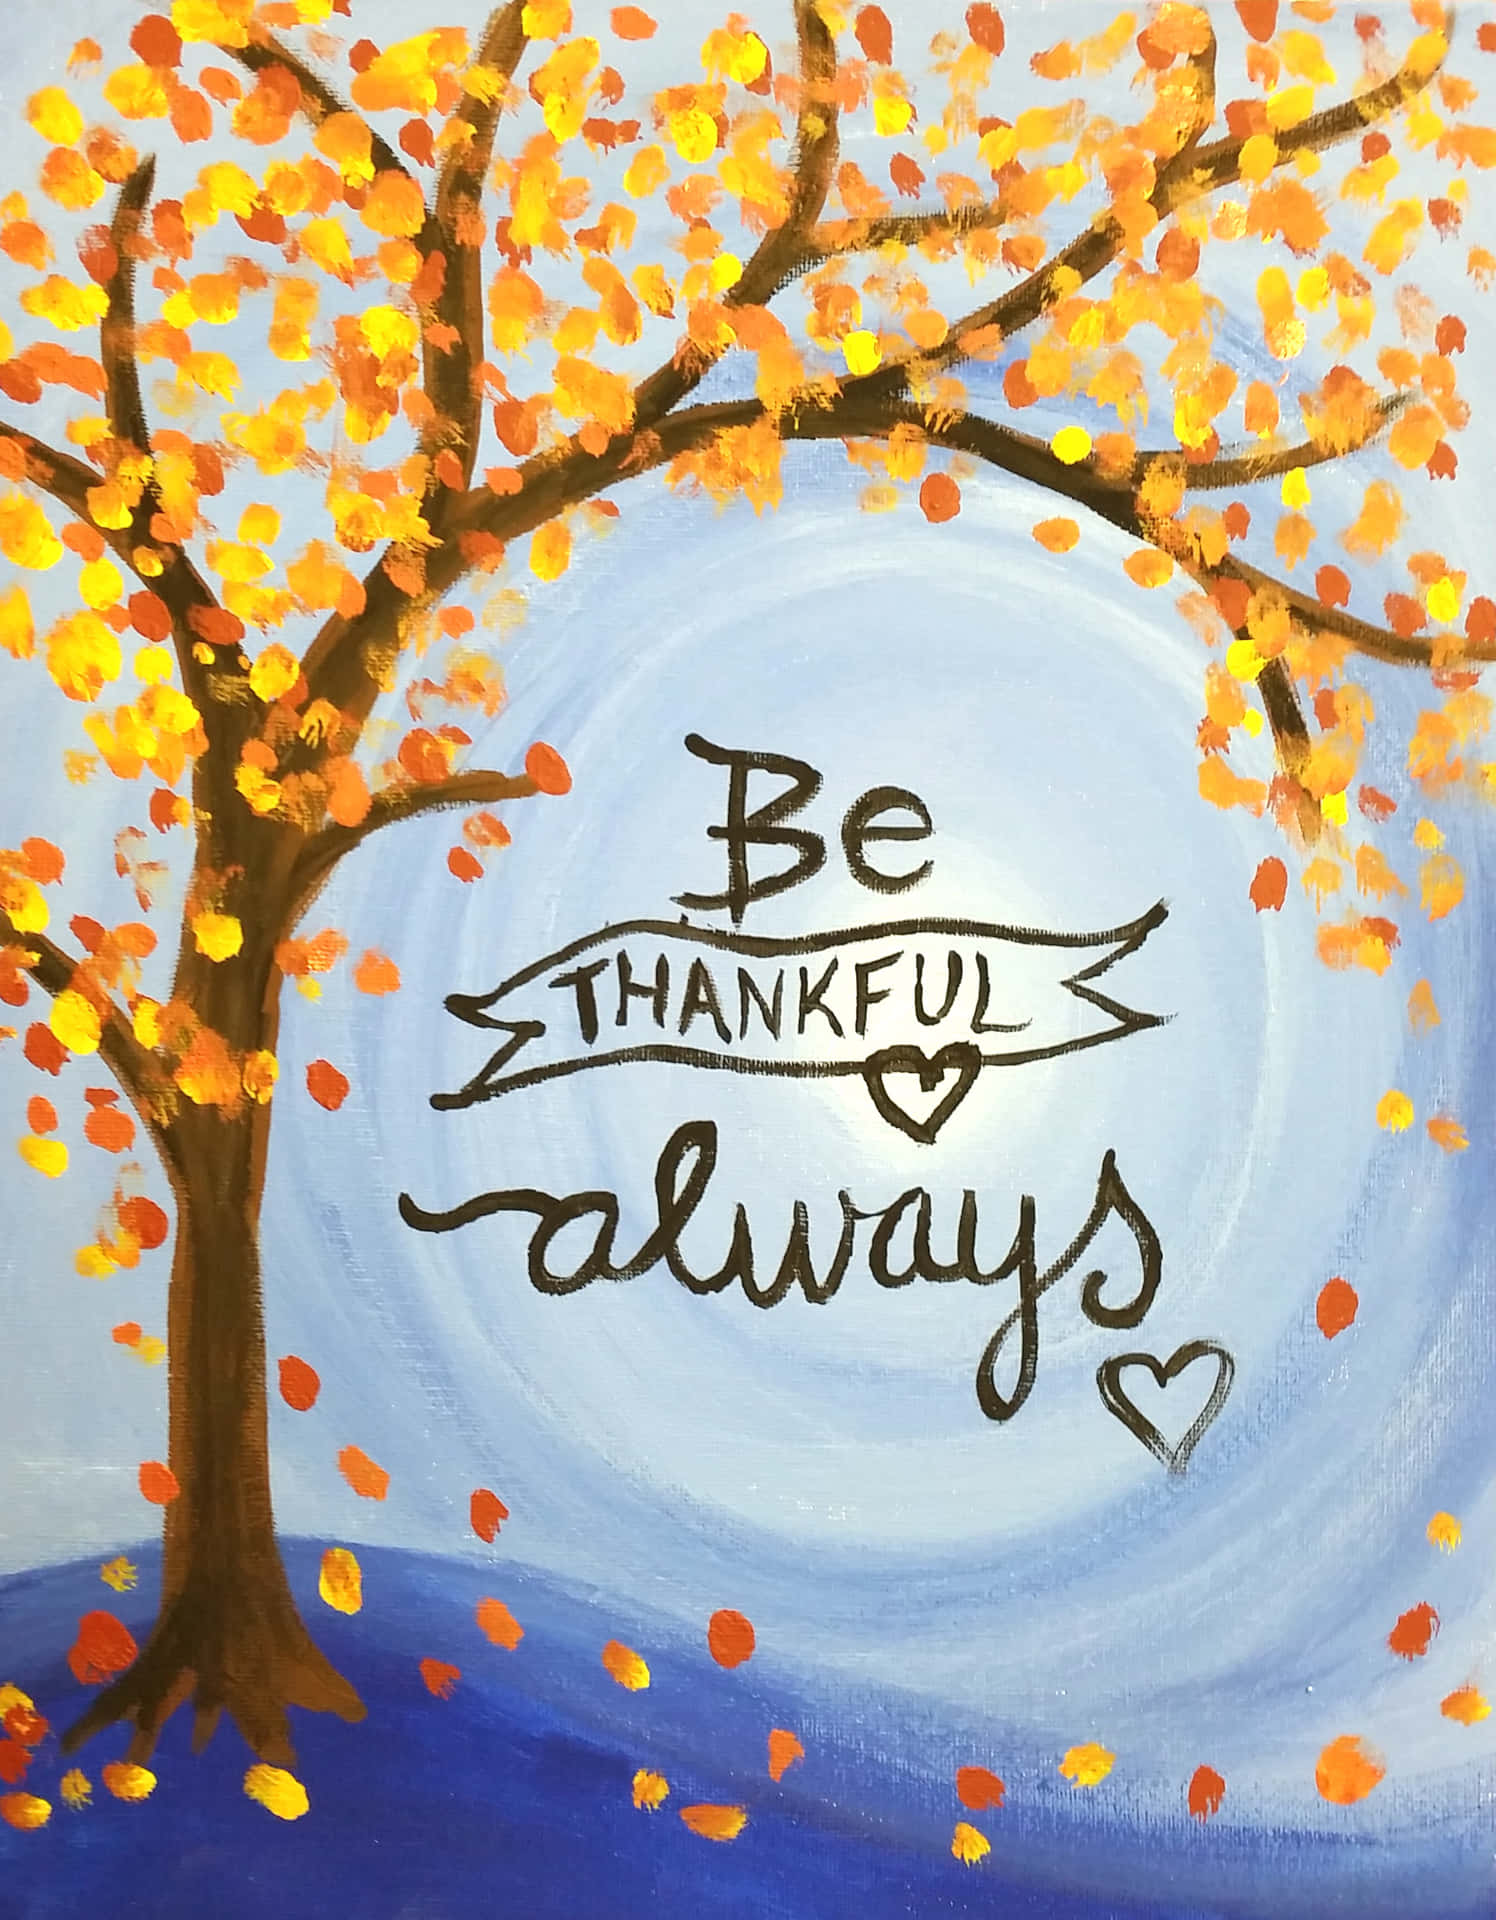 "Be thankful for the little moments that bring joy into your life"